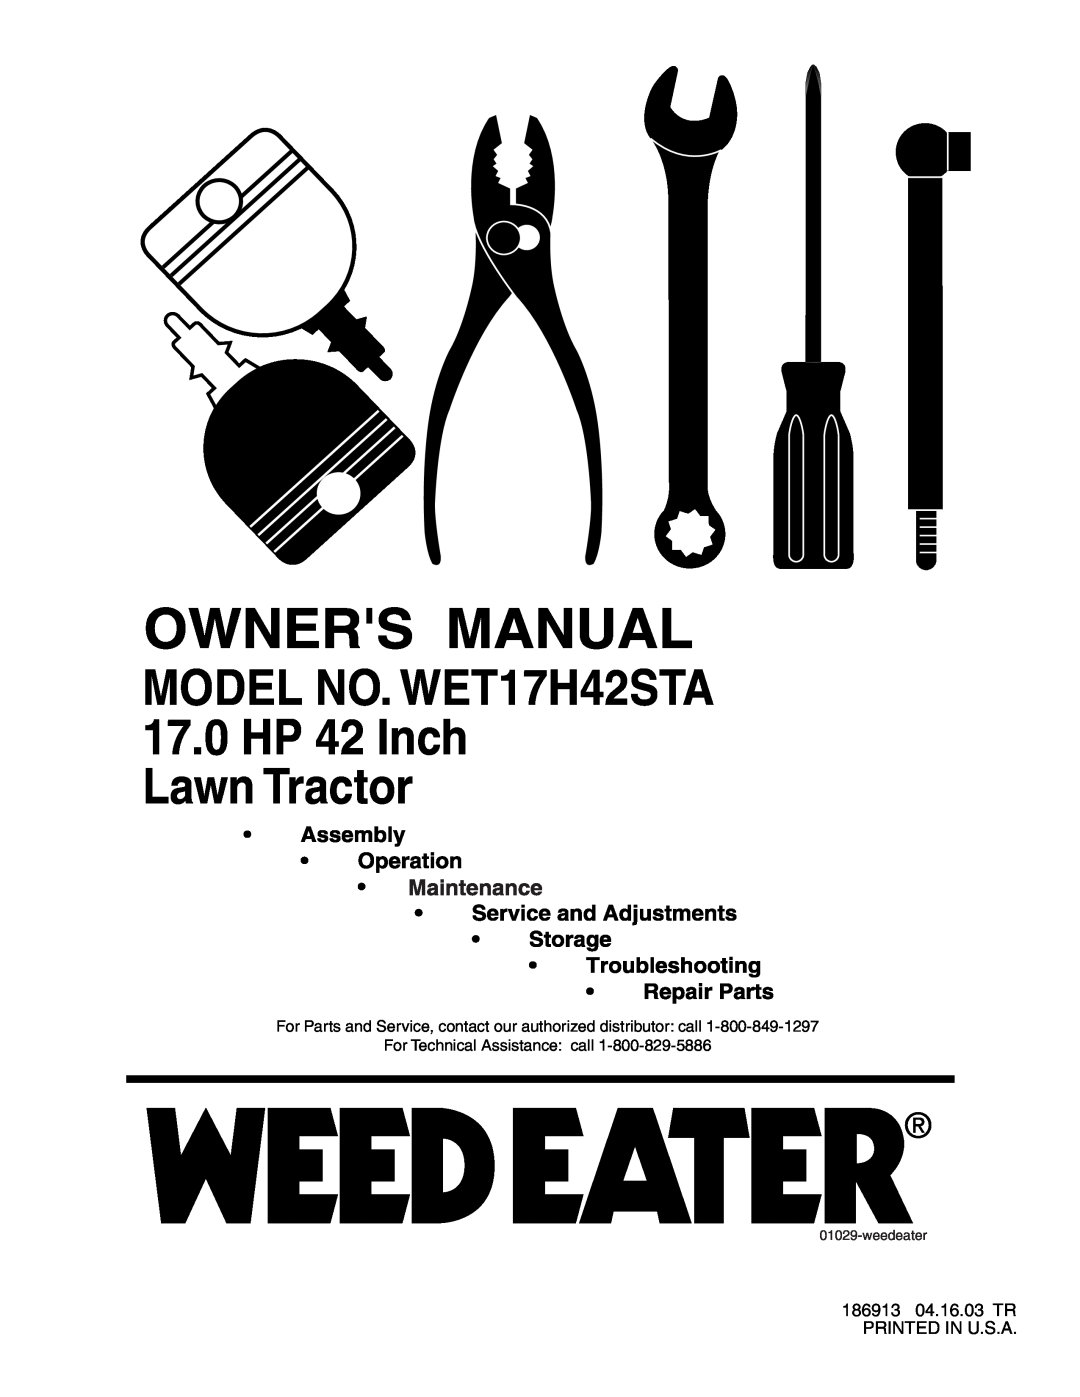 Weed Eater manual MODEL NO. WET17H42STA 17.0 HP 42 Inch Lawn Tractor 